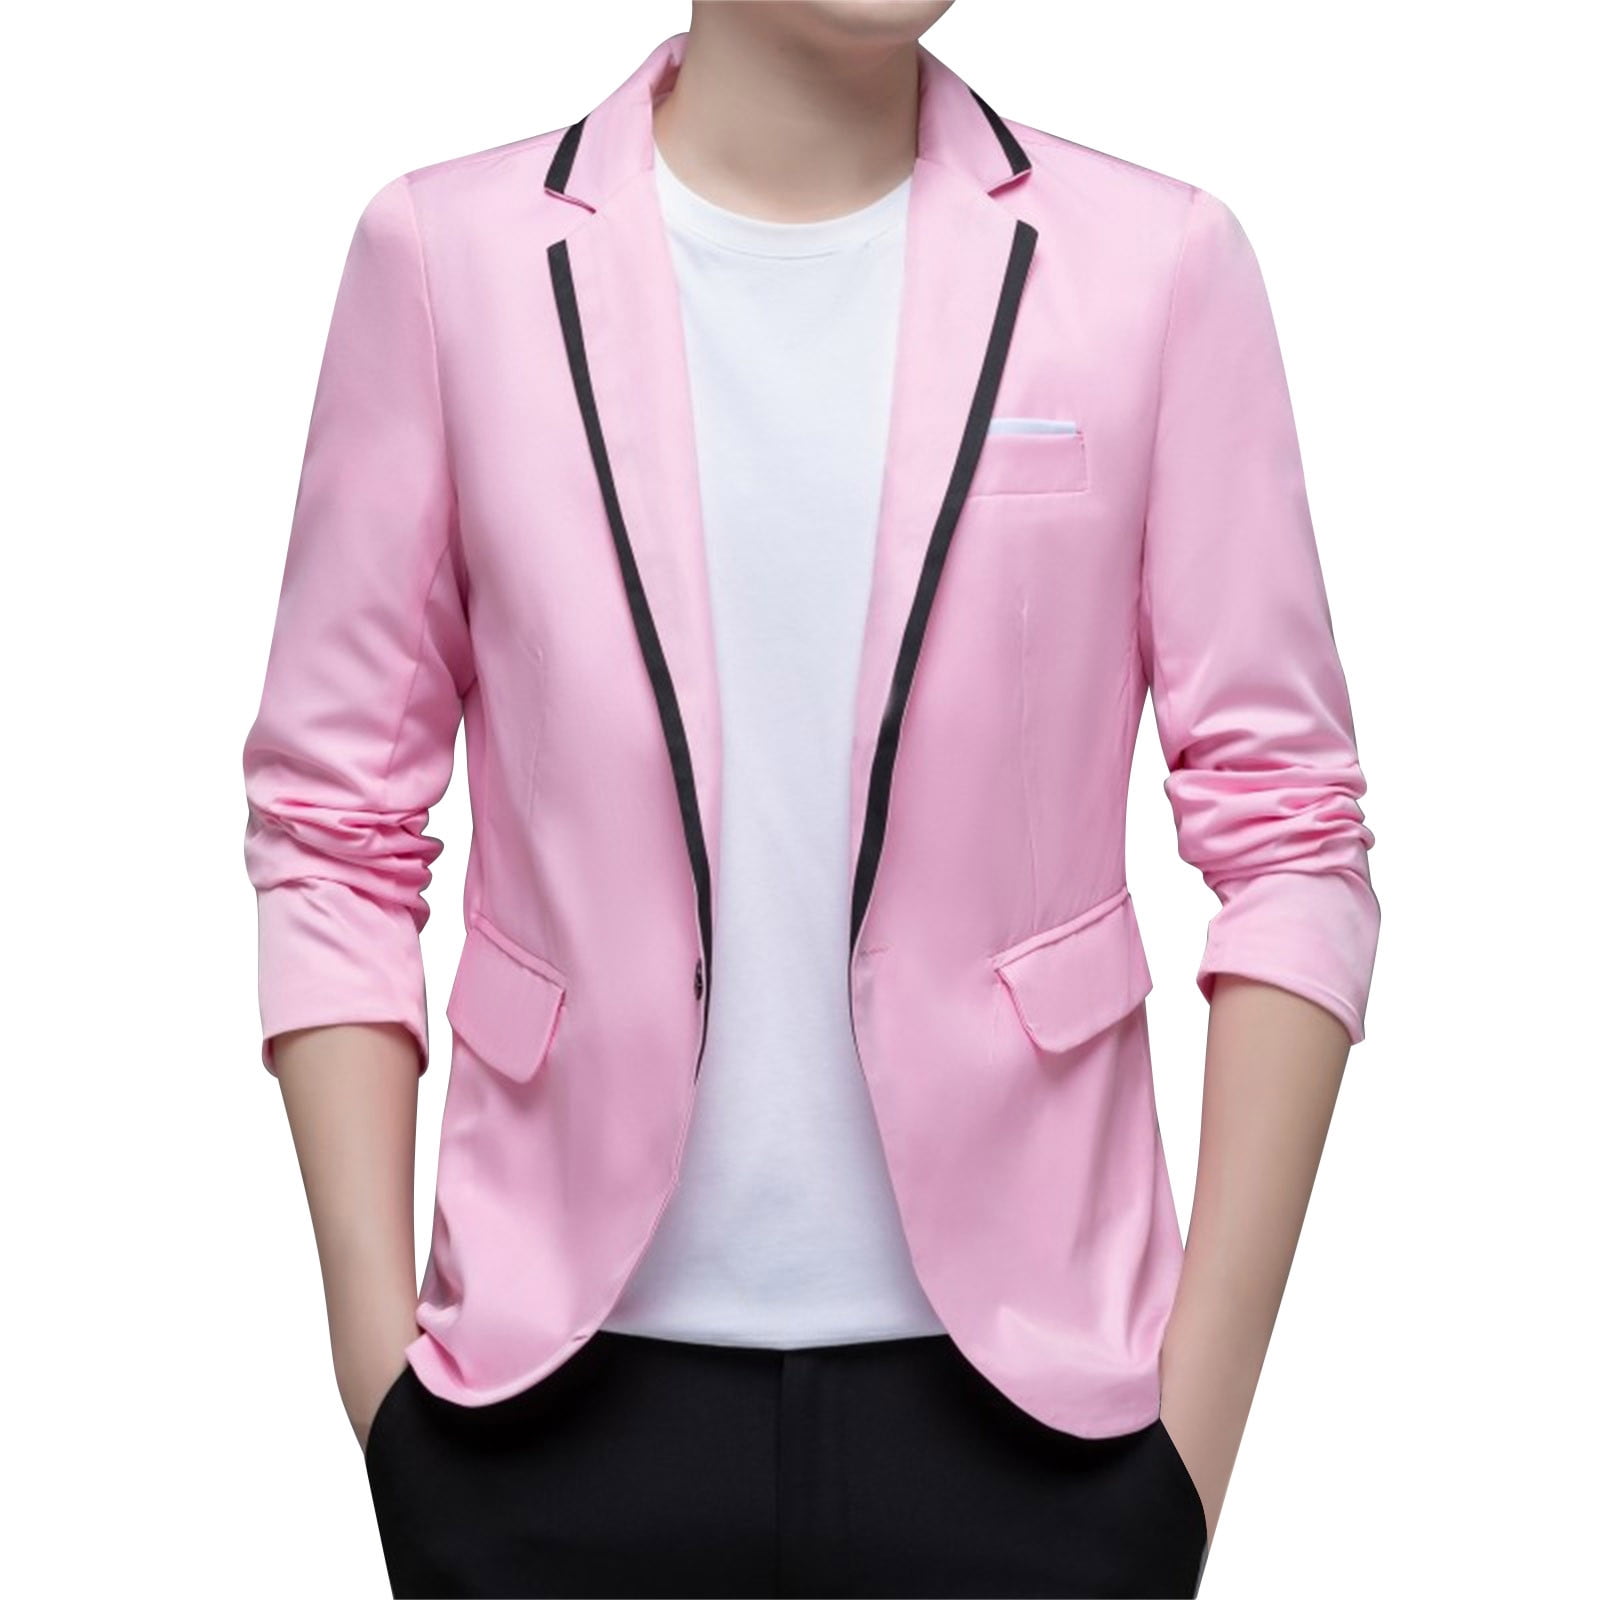 White Dress Shirt with Pink Coat Outfits For Men (3 ideas & outfits) |  Lookastic